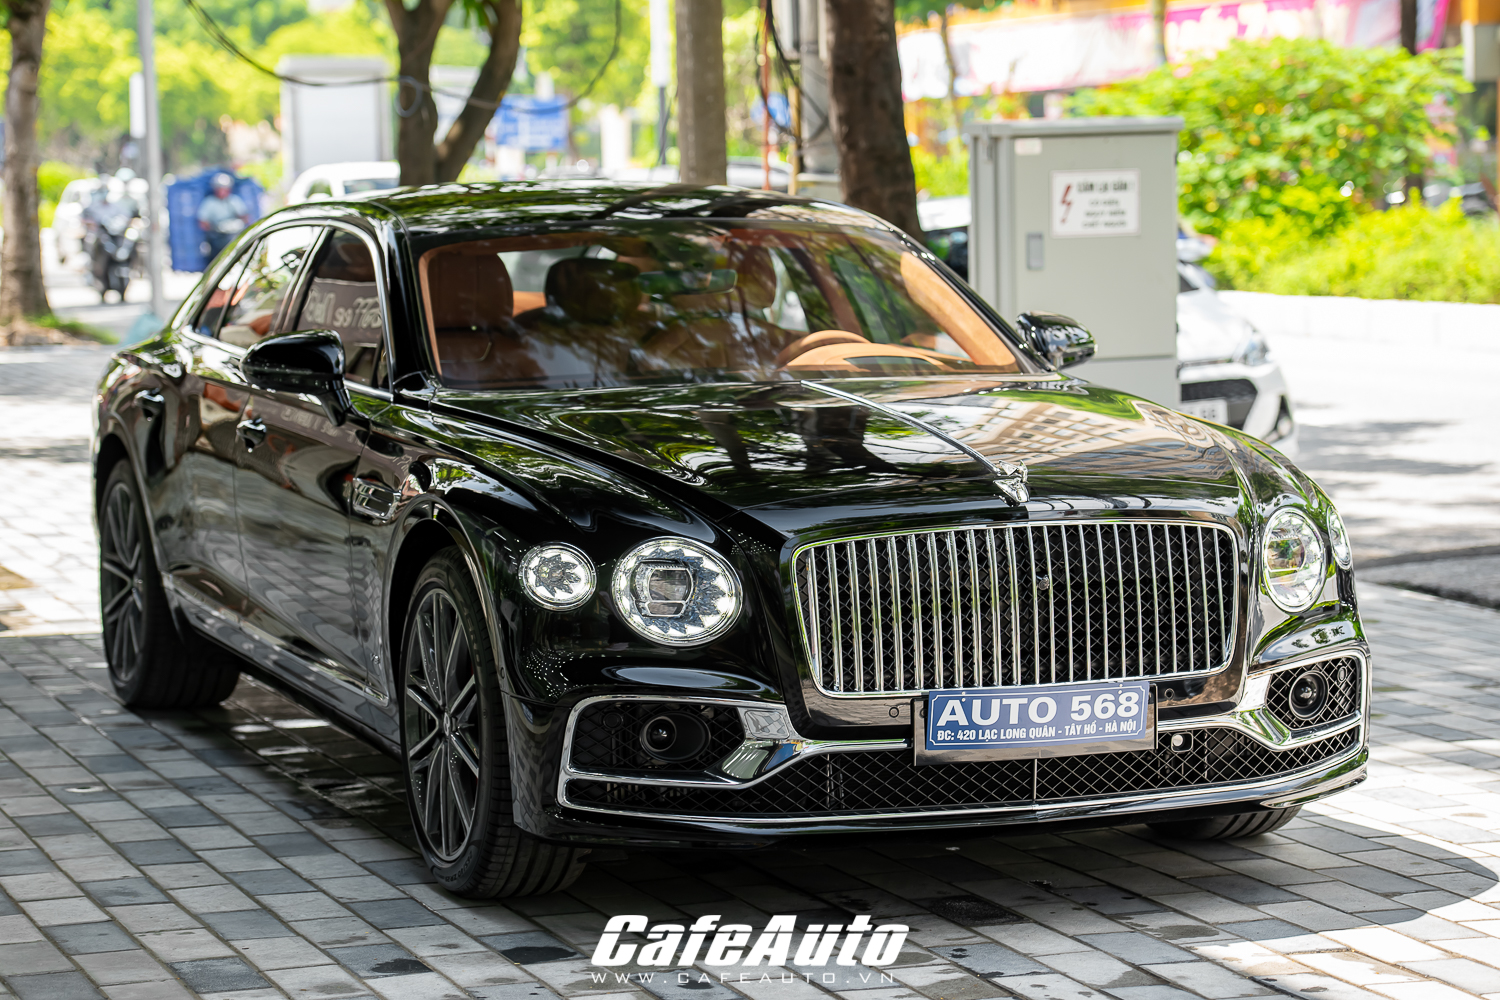 doan-di-bang-mua-bentley-flying-spur-20-ty-cafeautovn-11